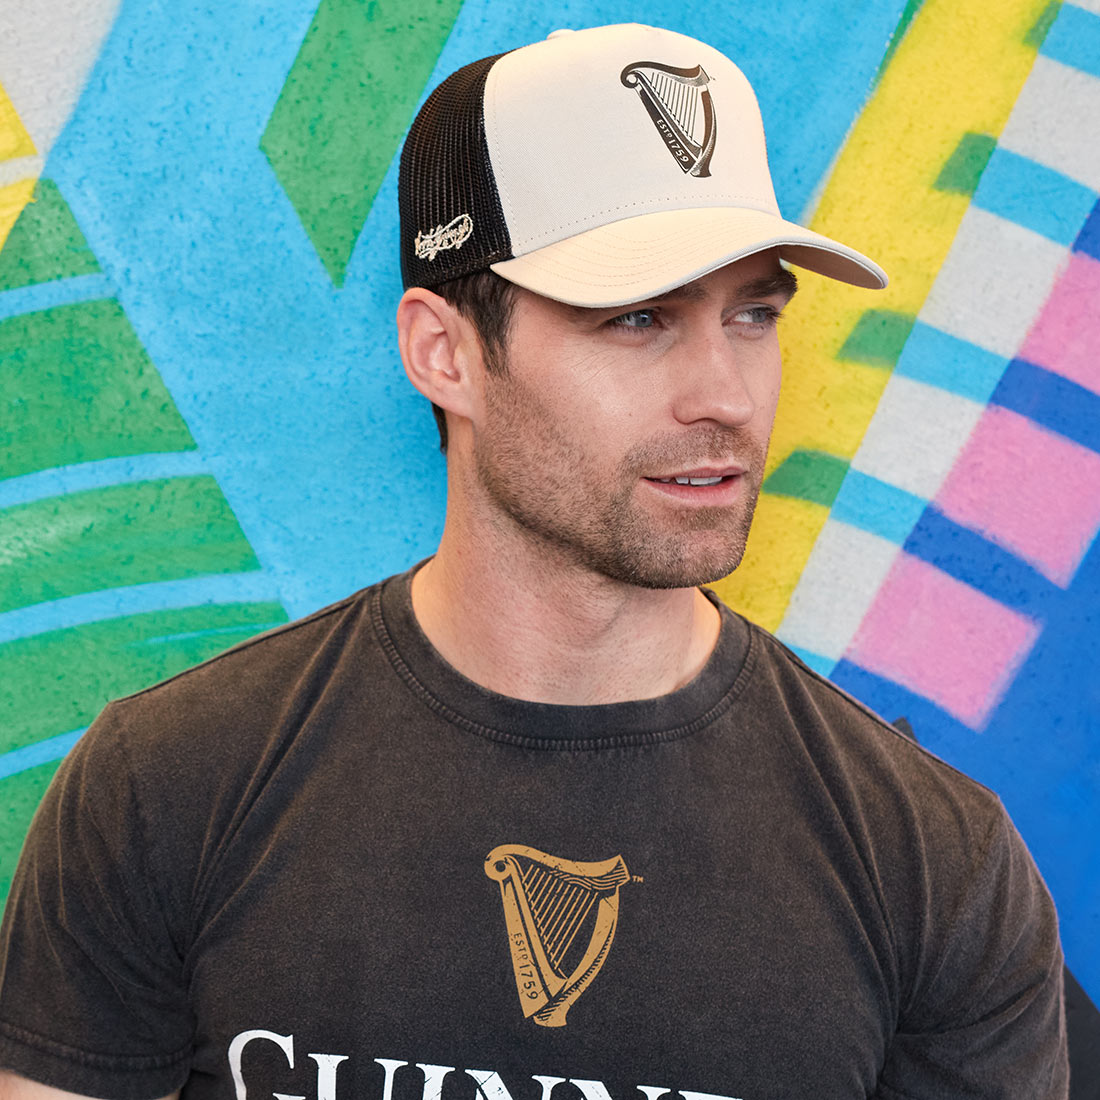 A man wearing a Guinness UK hat in front of a colorful wall decorated with the Guinness UK logo, featuring the Guinness Premium Beige with Black Harp Cap.